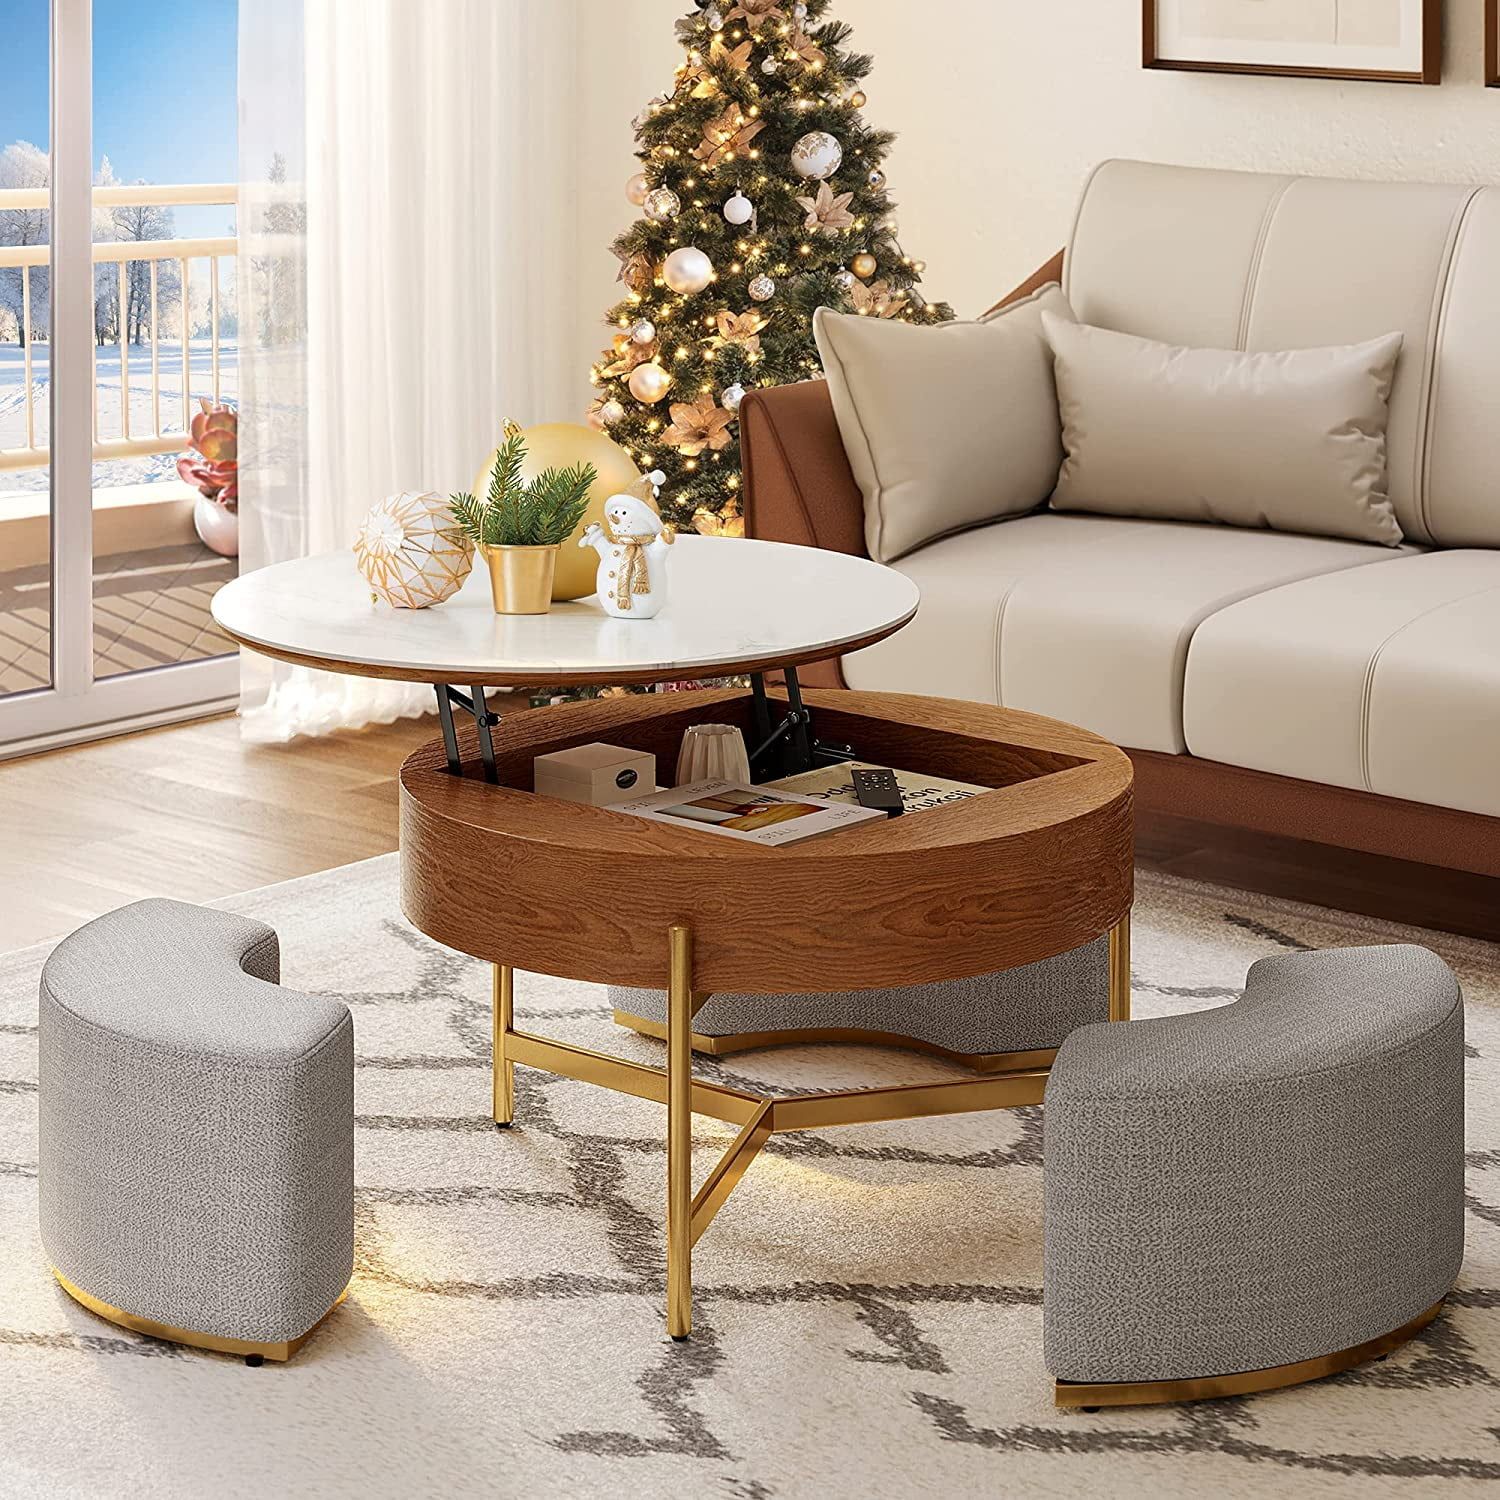 Lift Top Round Coffee Table With Storage Compartment 3 Stools Pop Up Stone  Tabletop Rising Top Modern Coffee Table Set For Living Room Apartment –  Walmart Intended For Round Coffee Tables With Storage (View 2 of 15)